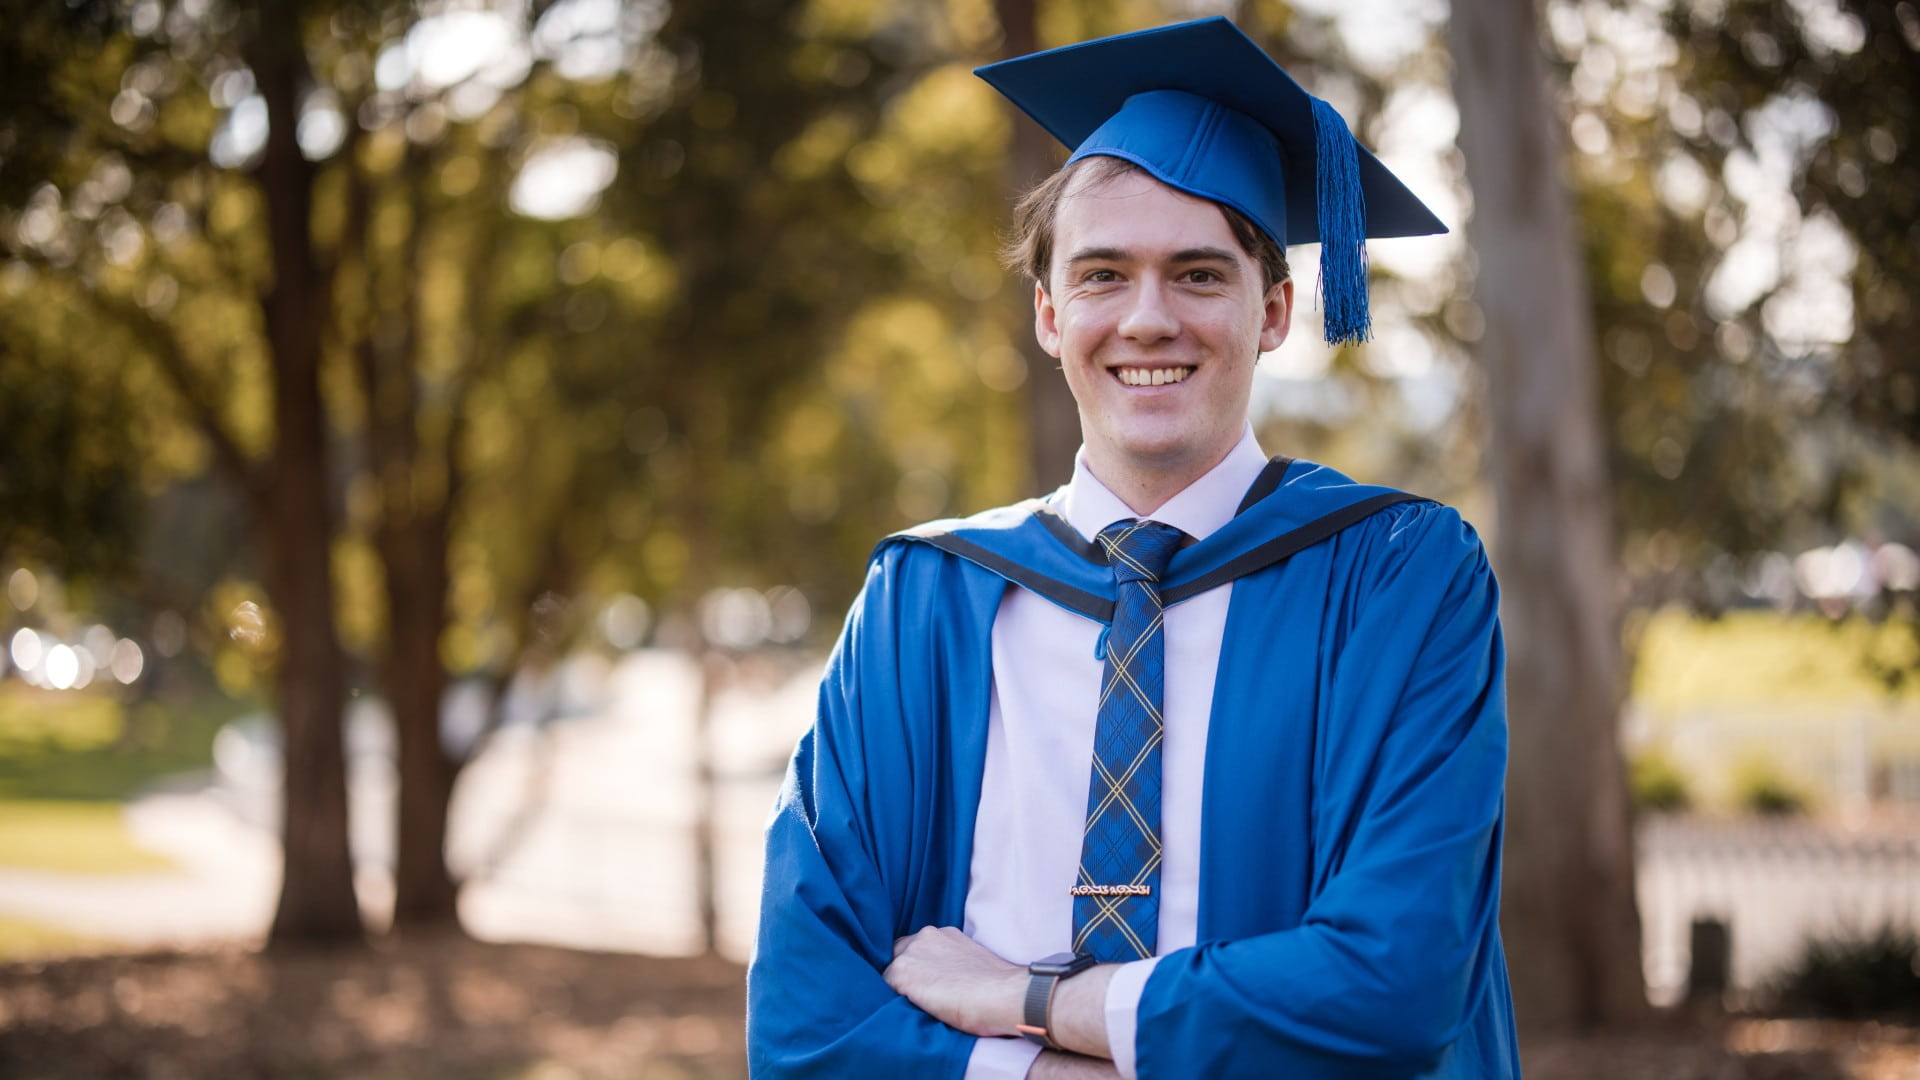 Jackson Cocks stands with his hands crossed in a blue graduation gown and cap. Photo: Michael Gray